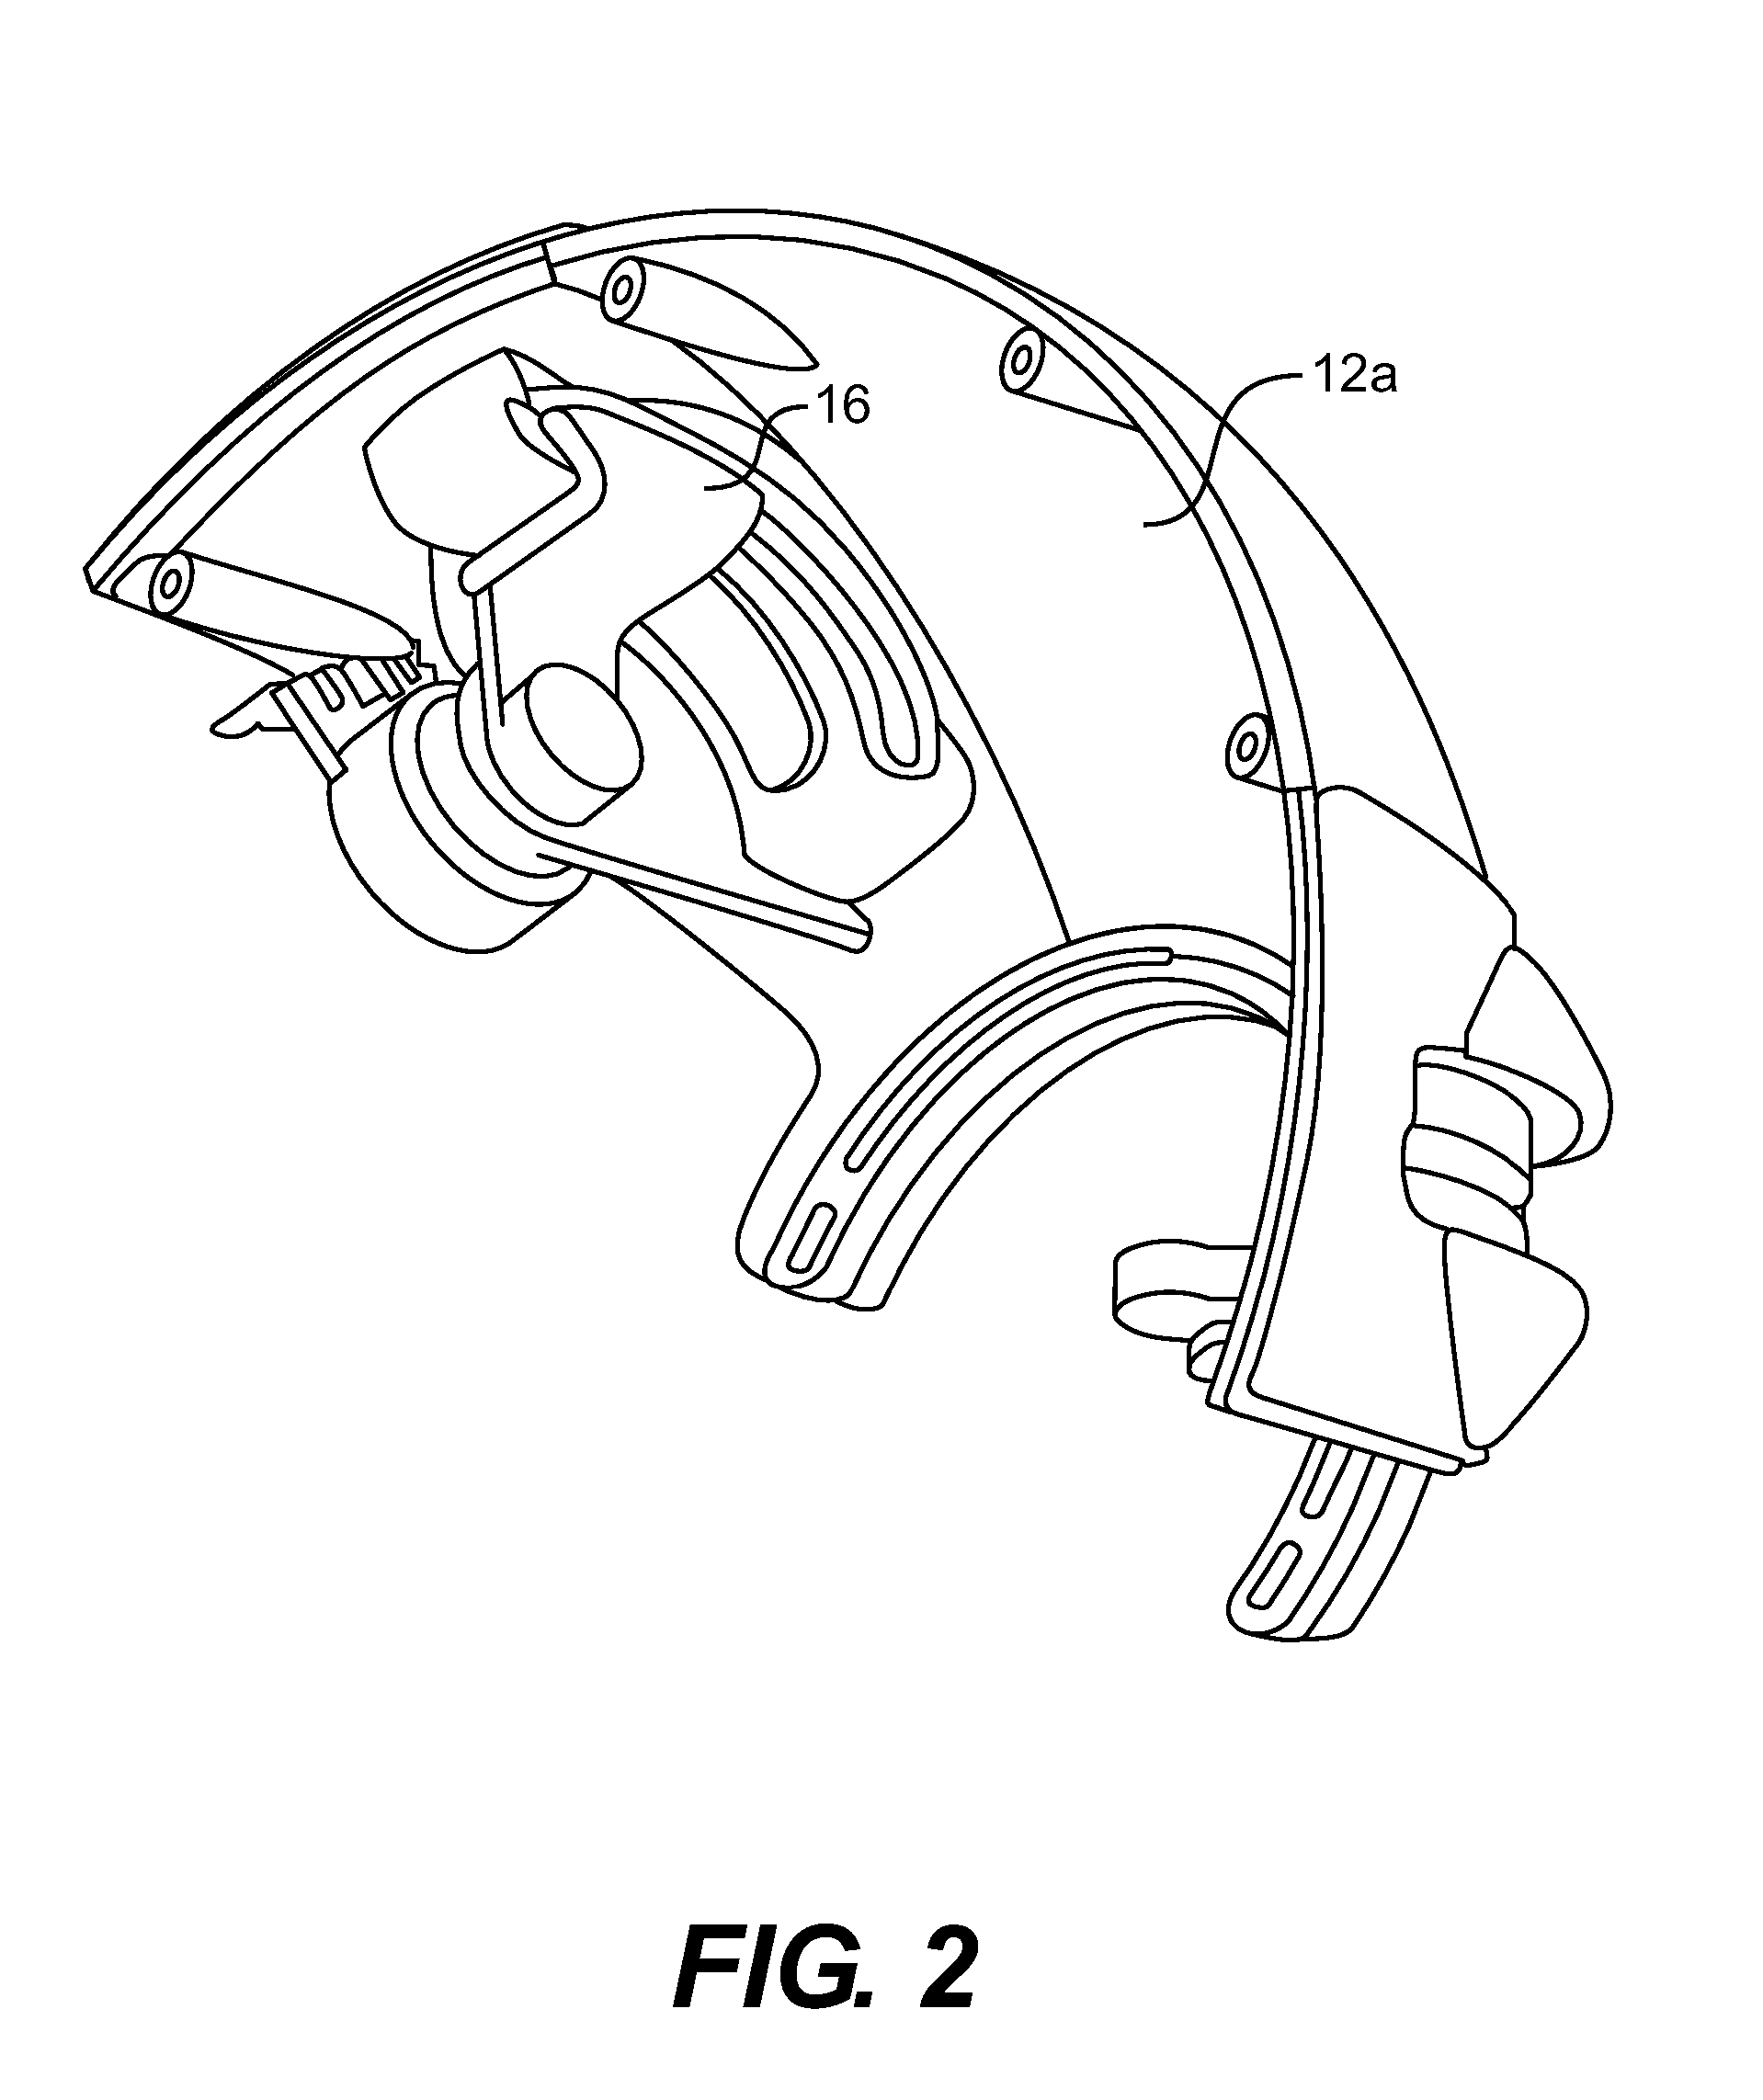 System For a Portable Hands-Free Breast Pump and Method of Using the Same